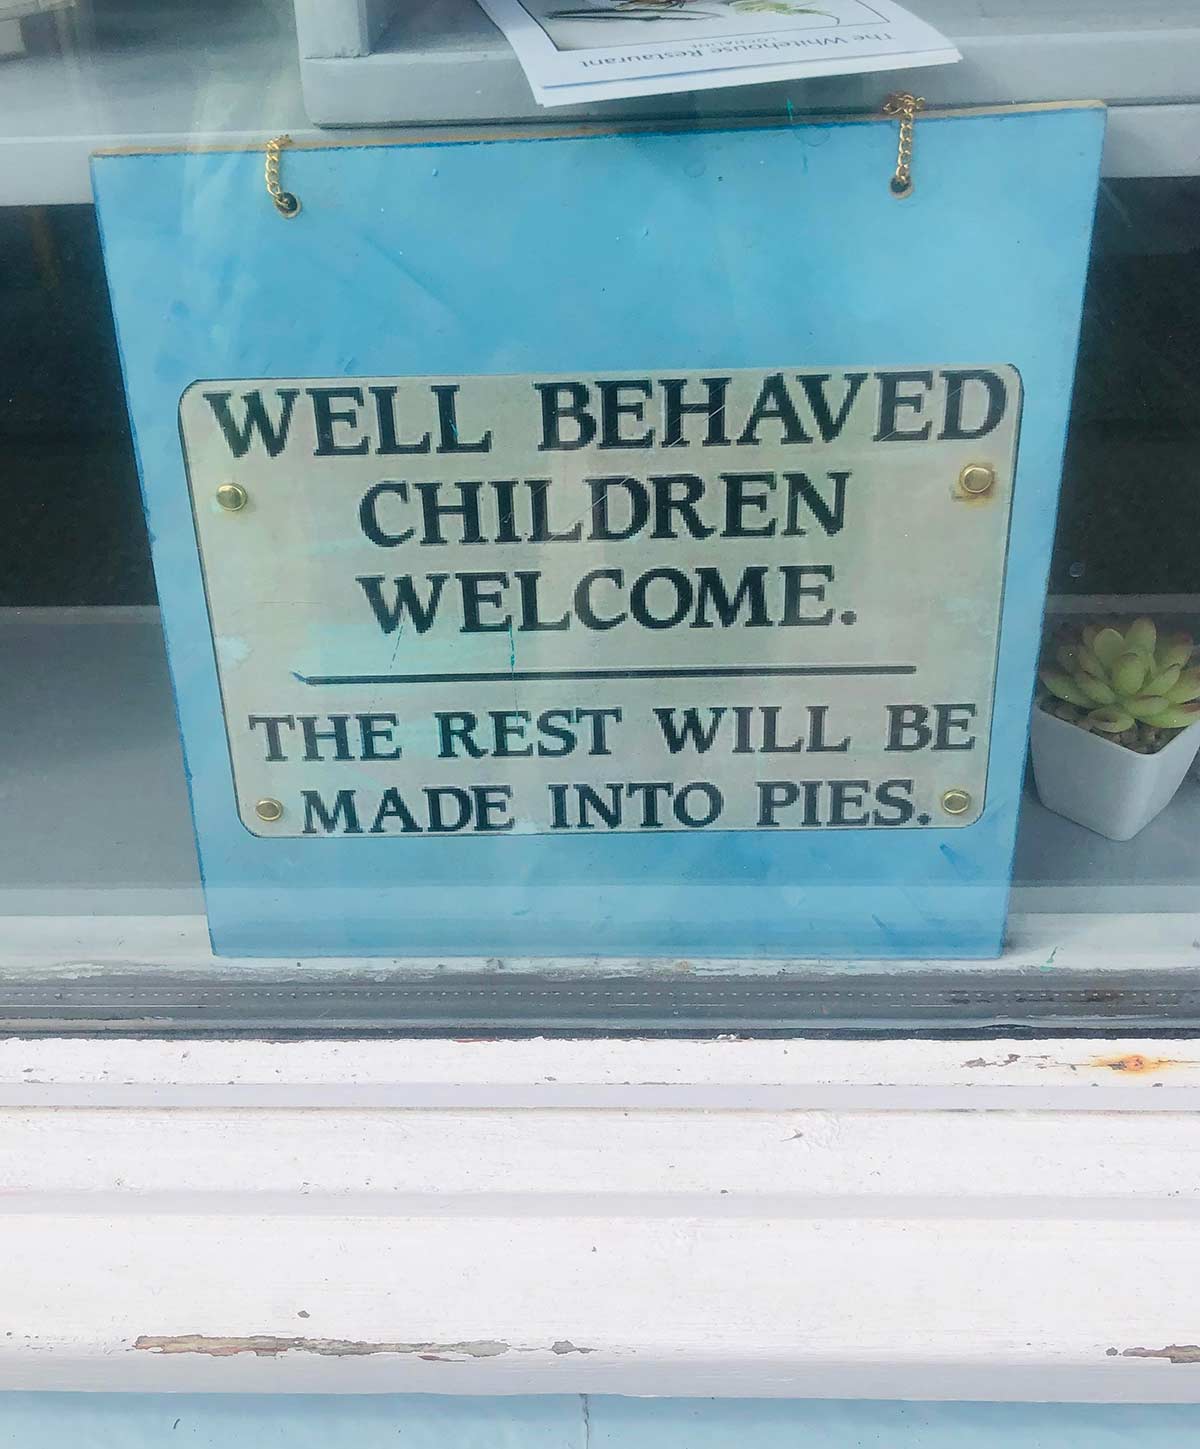 Well behaved children welcome...